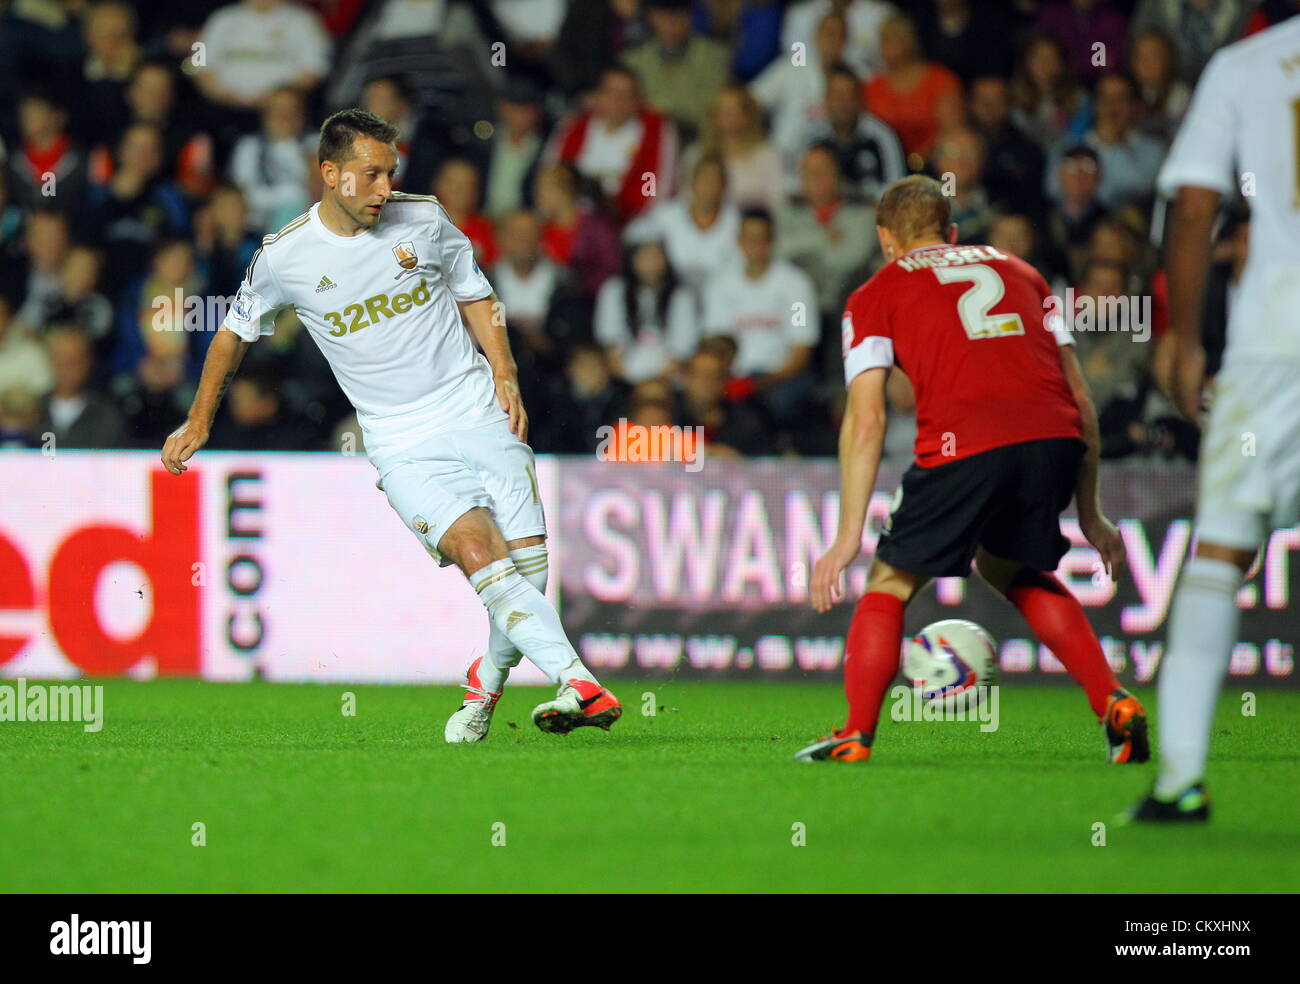 Pictured L-R: Stephen Dobbie of Swansea against Bobby Hassell of Barnsley. Tuesday 28 August 2012  Re: Capital One Cup game, Swansea City FC v Barnsley at the Liberty Stadium, south Wales. Stock Photo